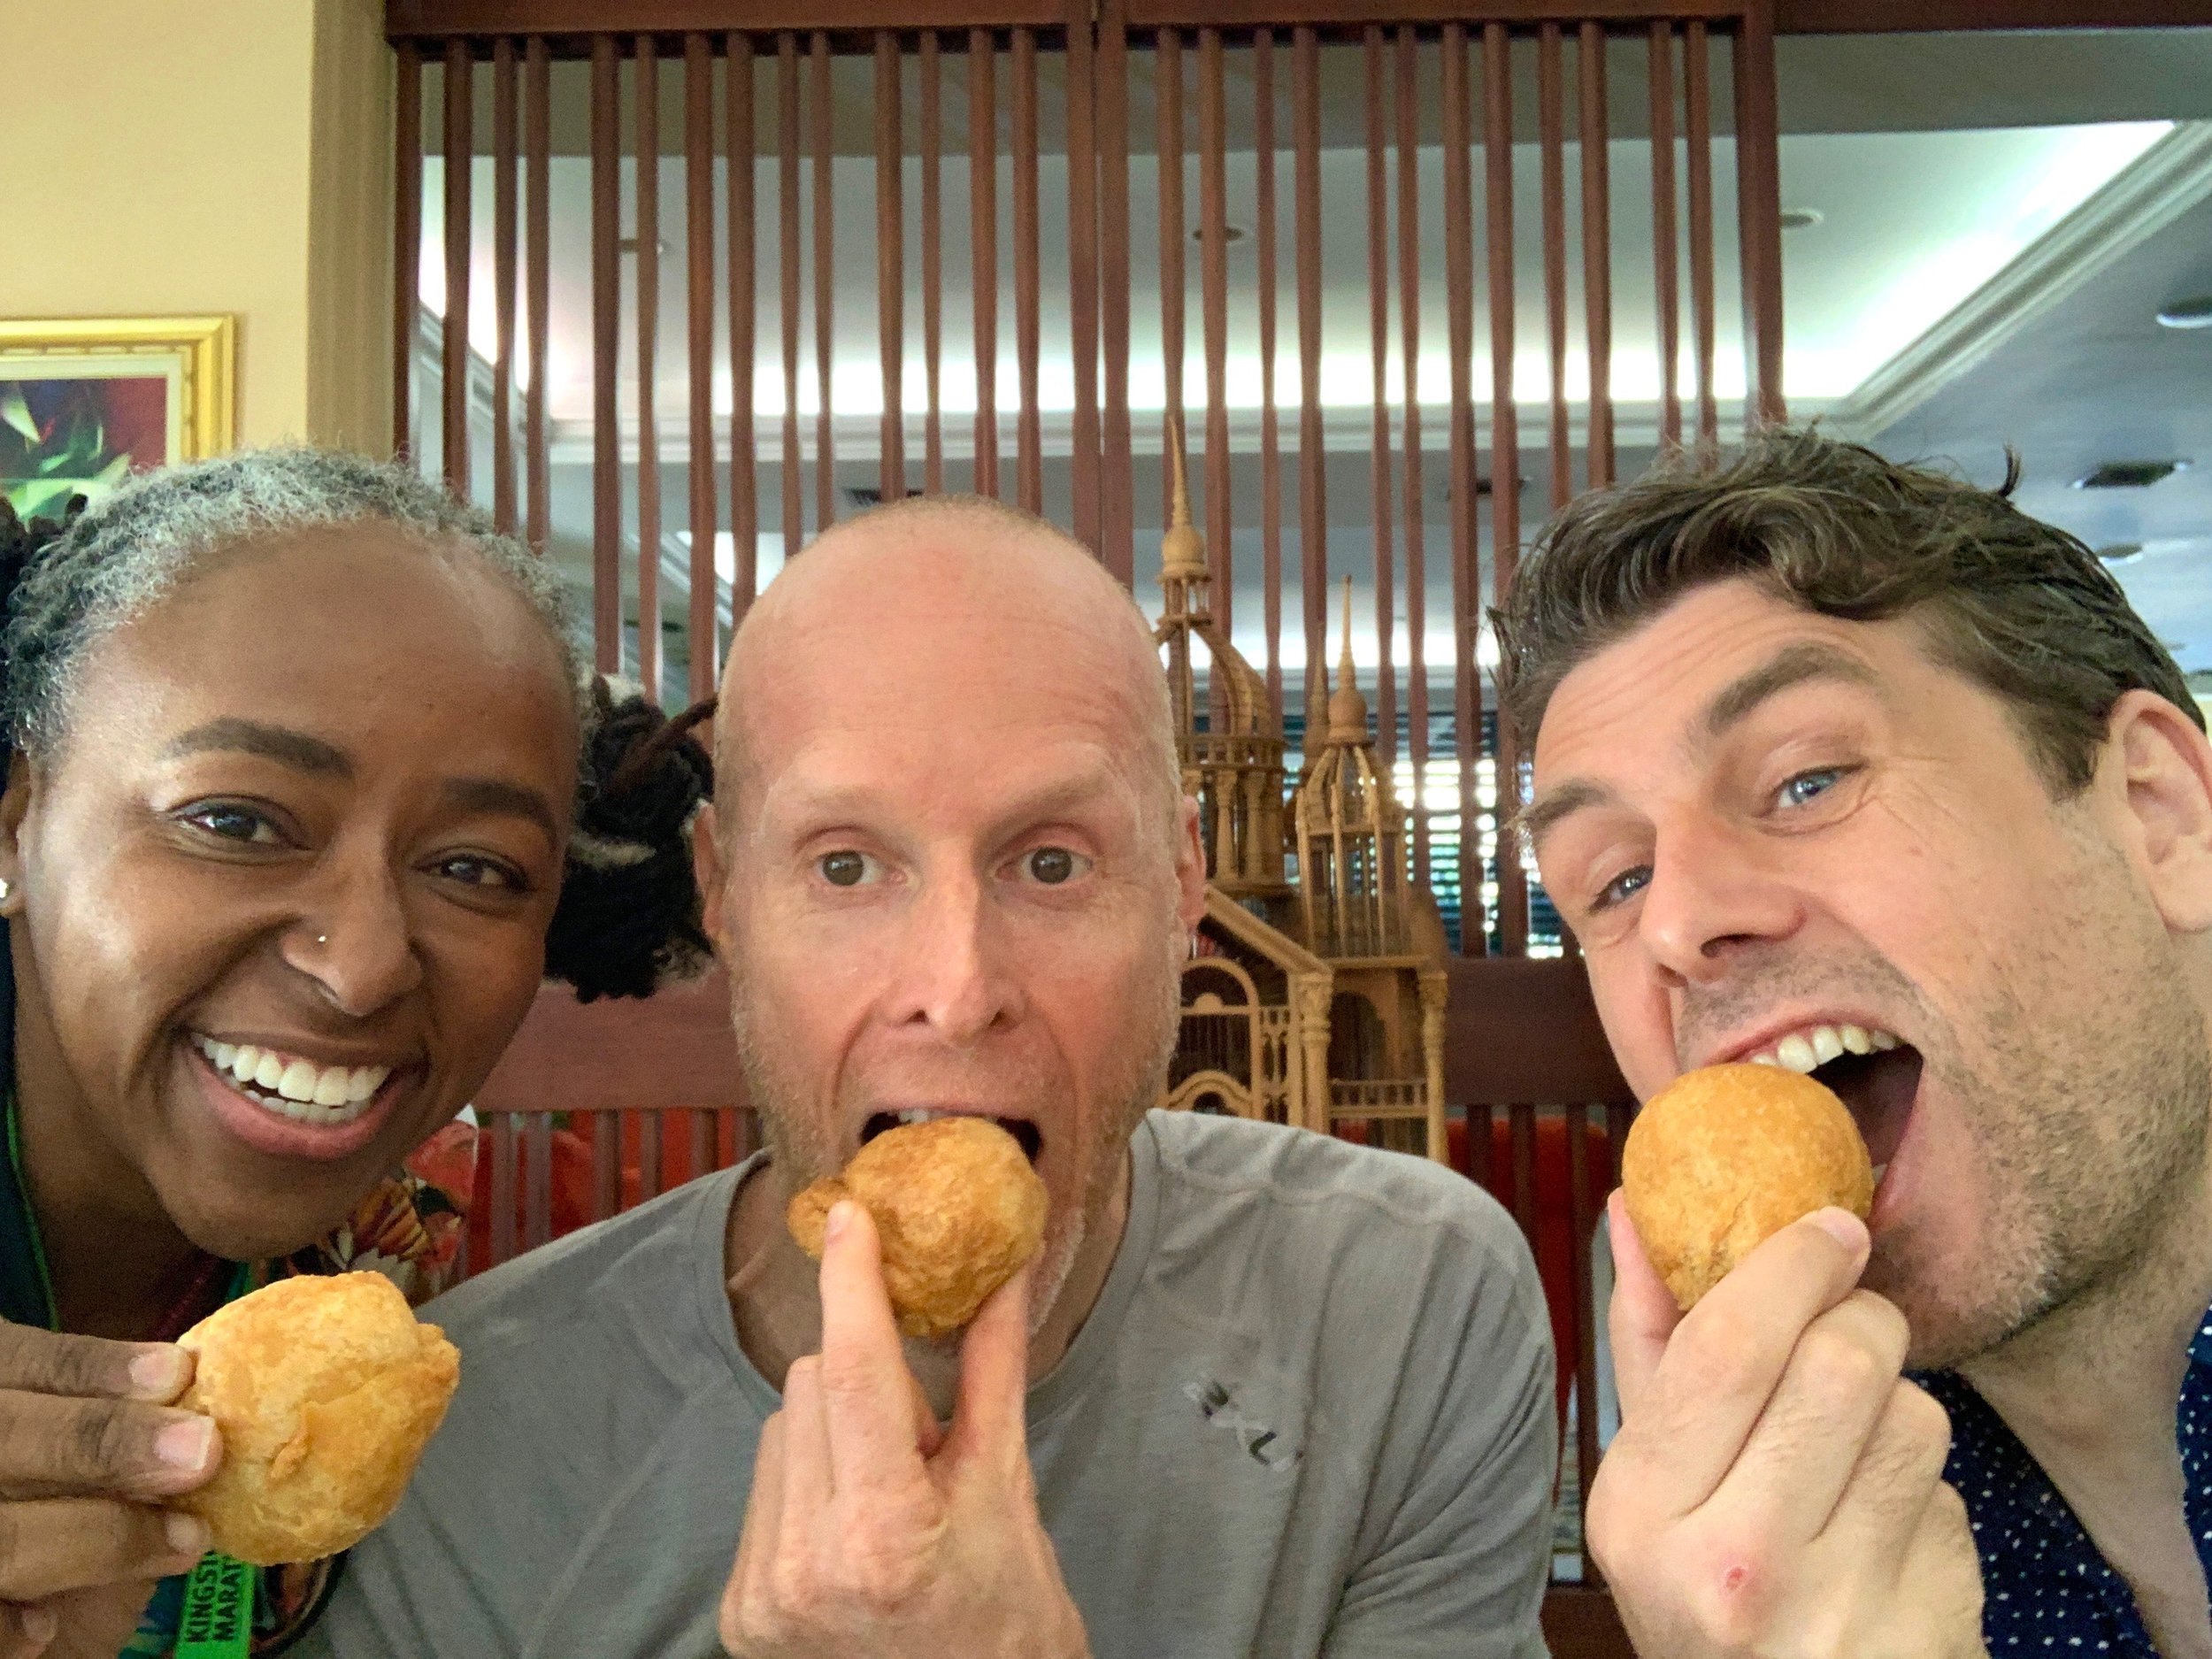  Post-race refueling with fried dumplings (yum!) and my fellow runners Matt and Adharanand. 